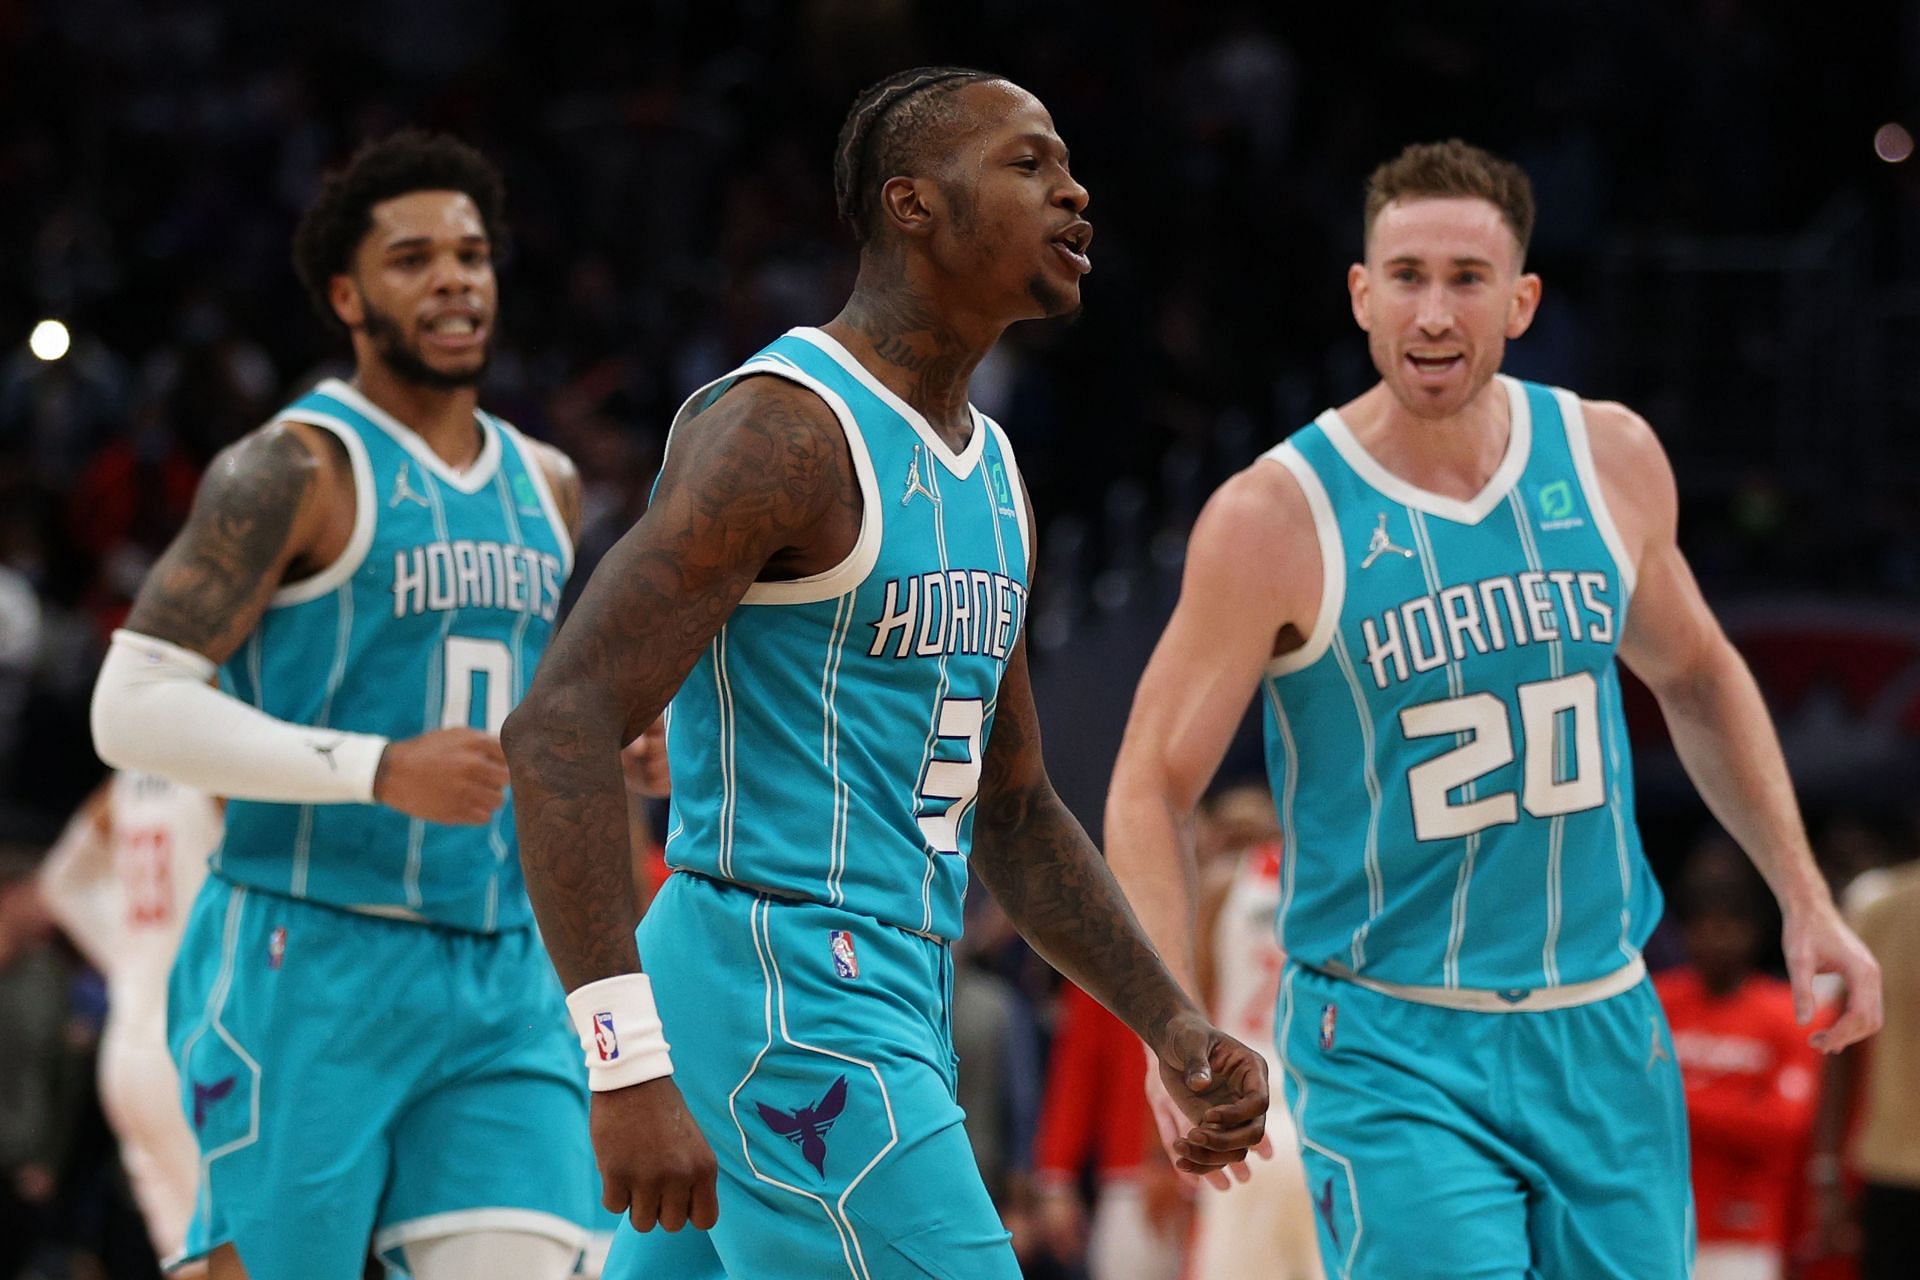 Charlotte Hornets key players Miles Bridges #0 (left), Terry Rozier #3 (middle), and Gordon Hayward #20 (right)